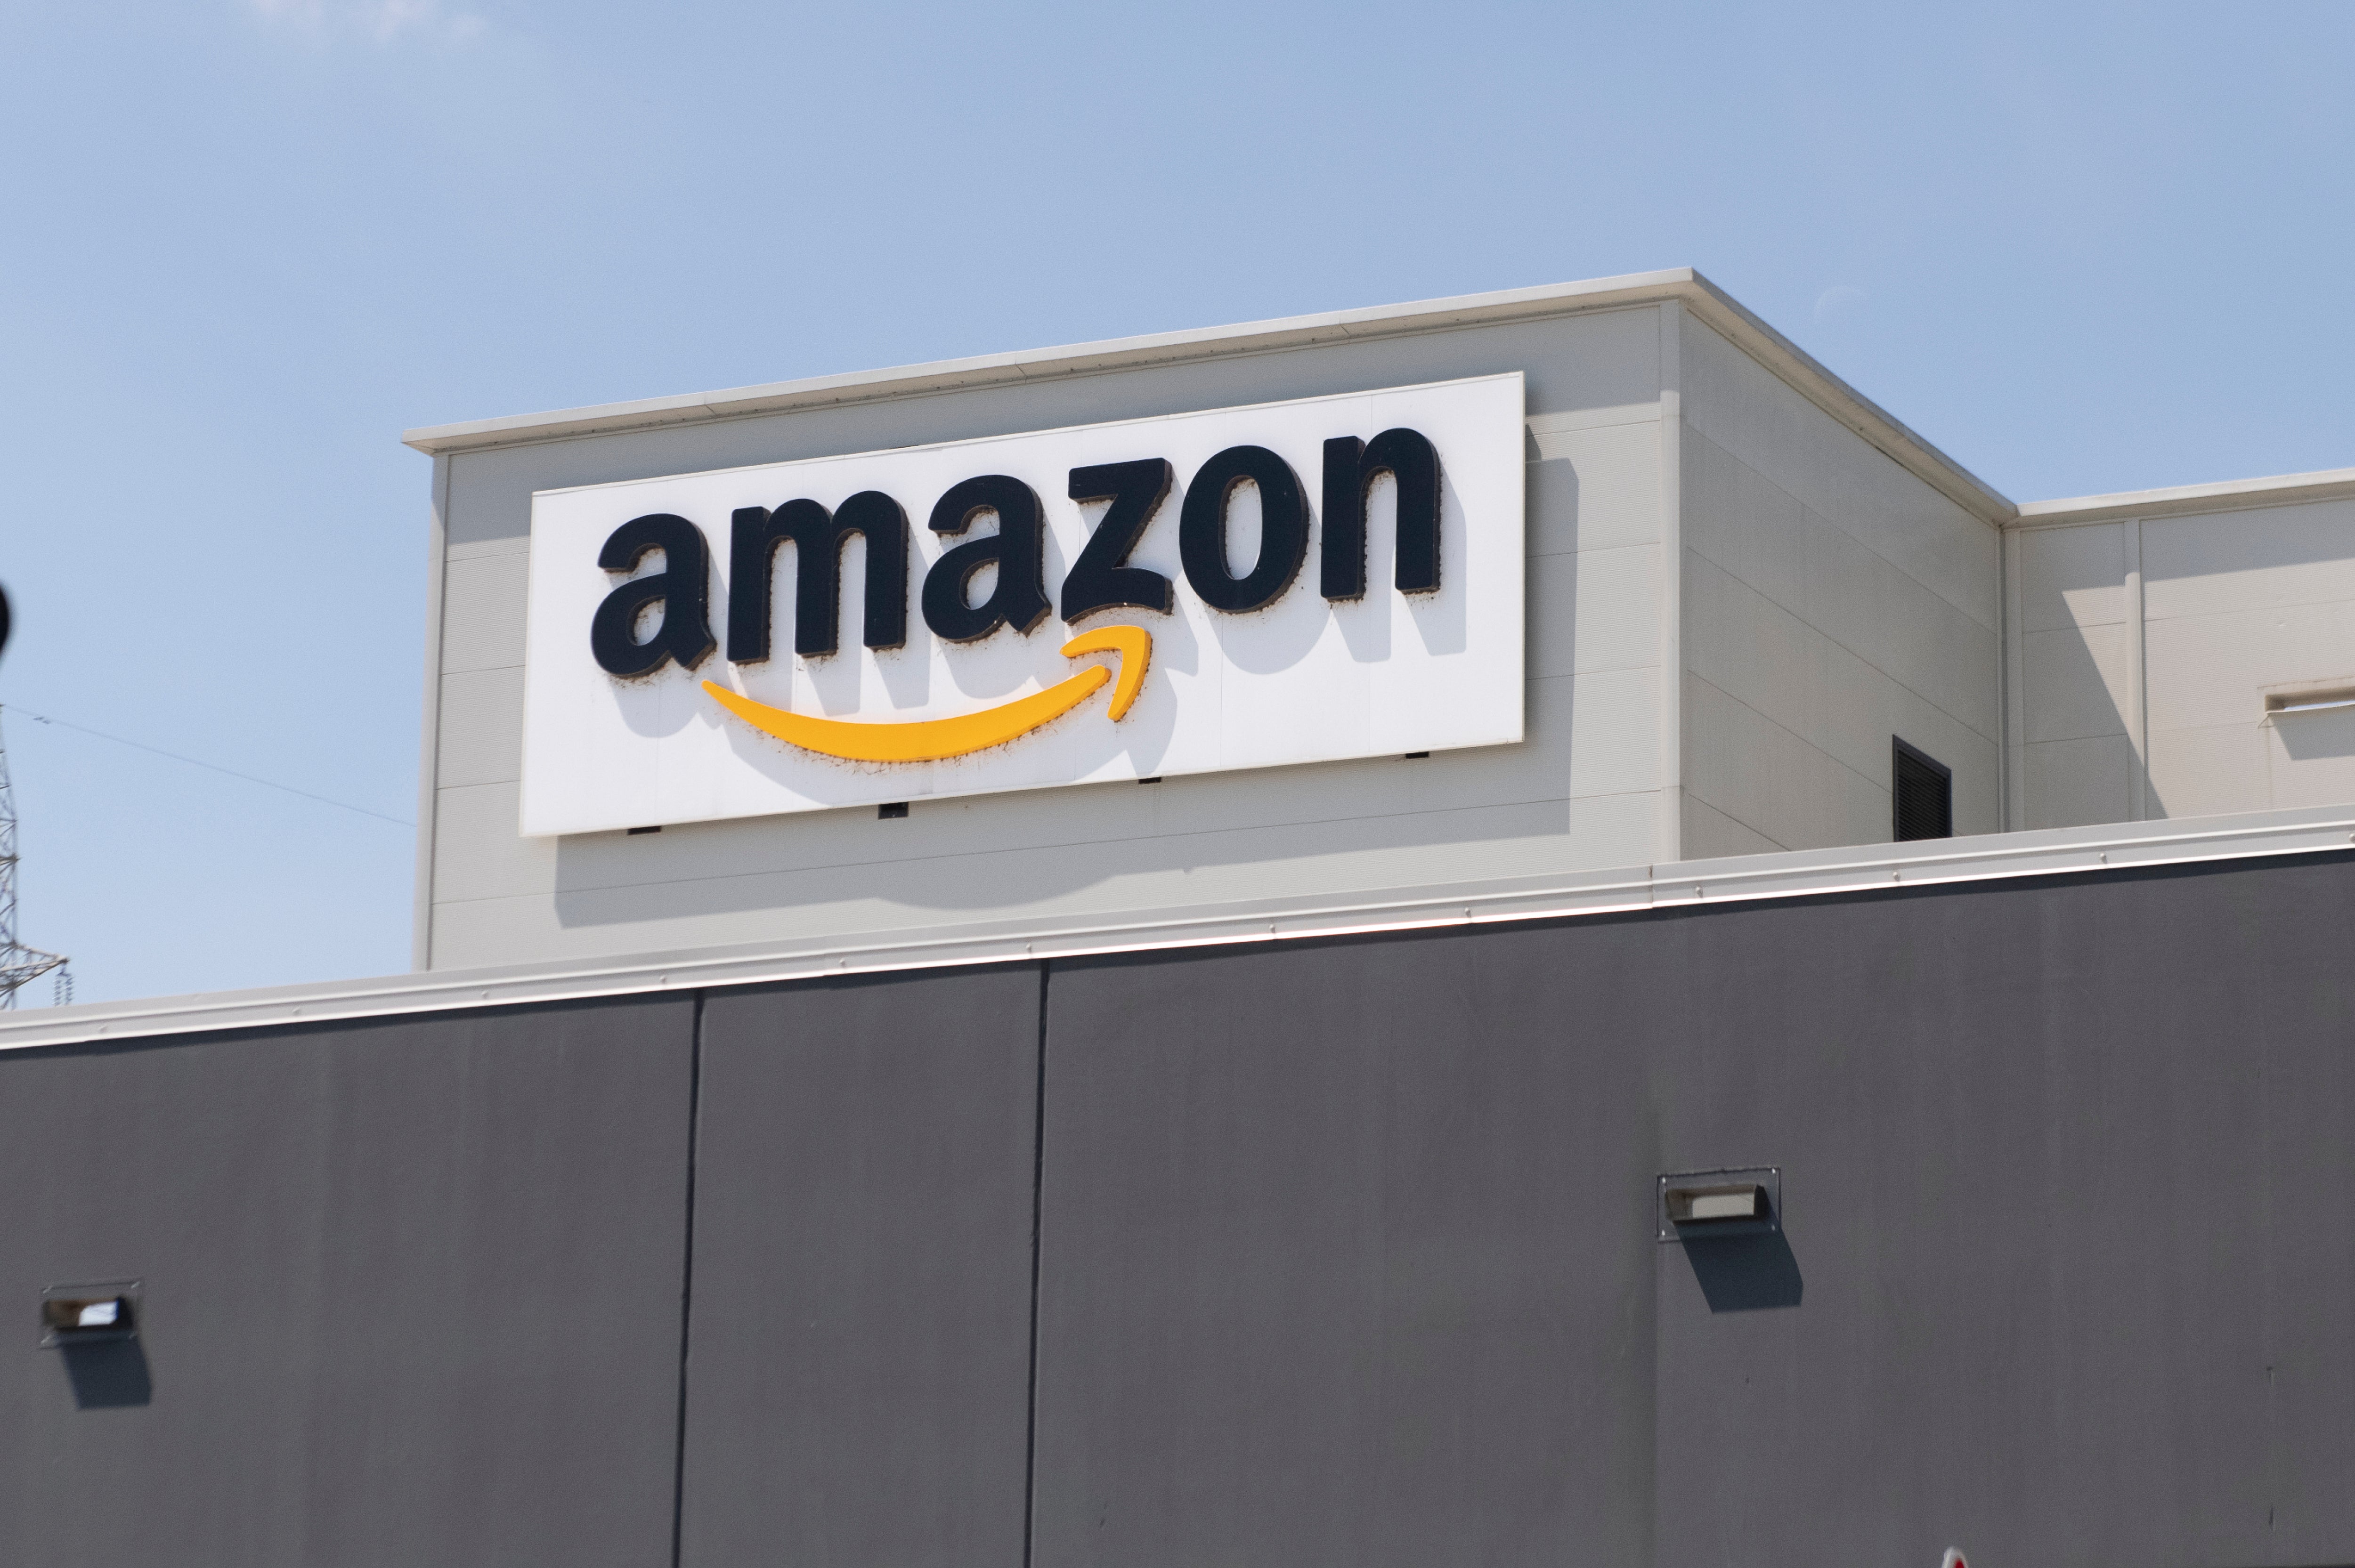 The Amazon logo can be seen at a location in Torrazza Piemonte near Turin, Italy 3 June, 2021. The company’s median worker reportedly made less than $30,000 last year.